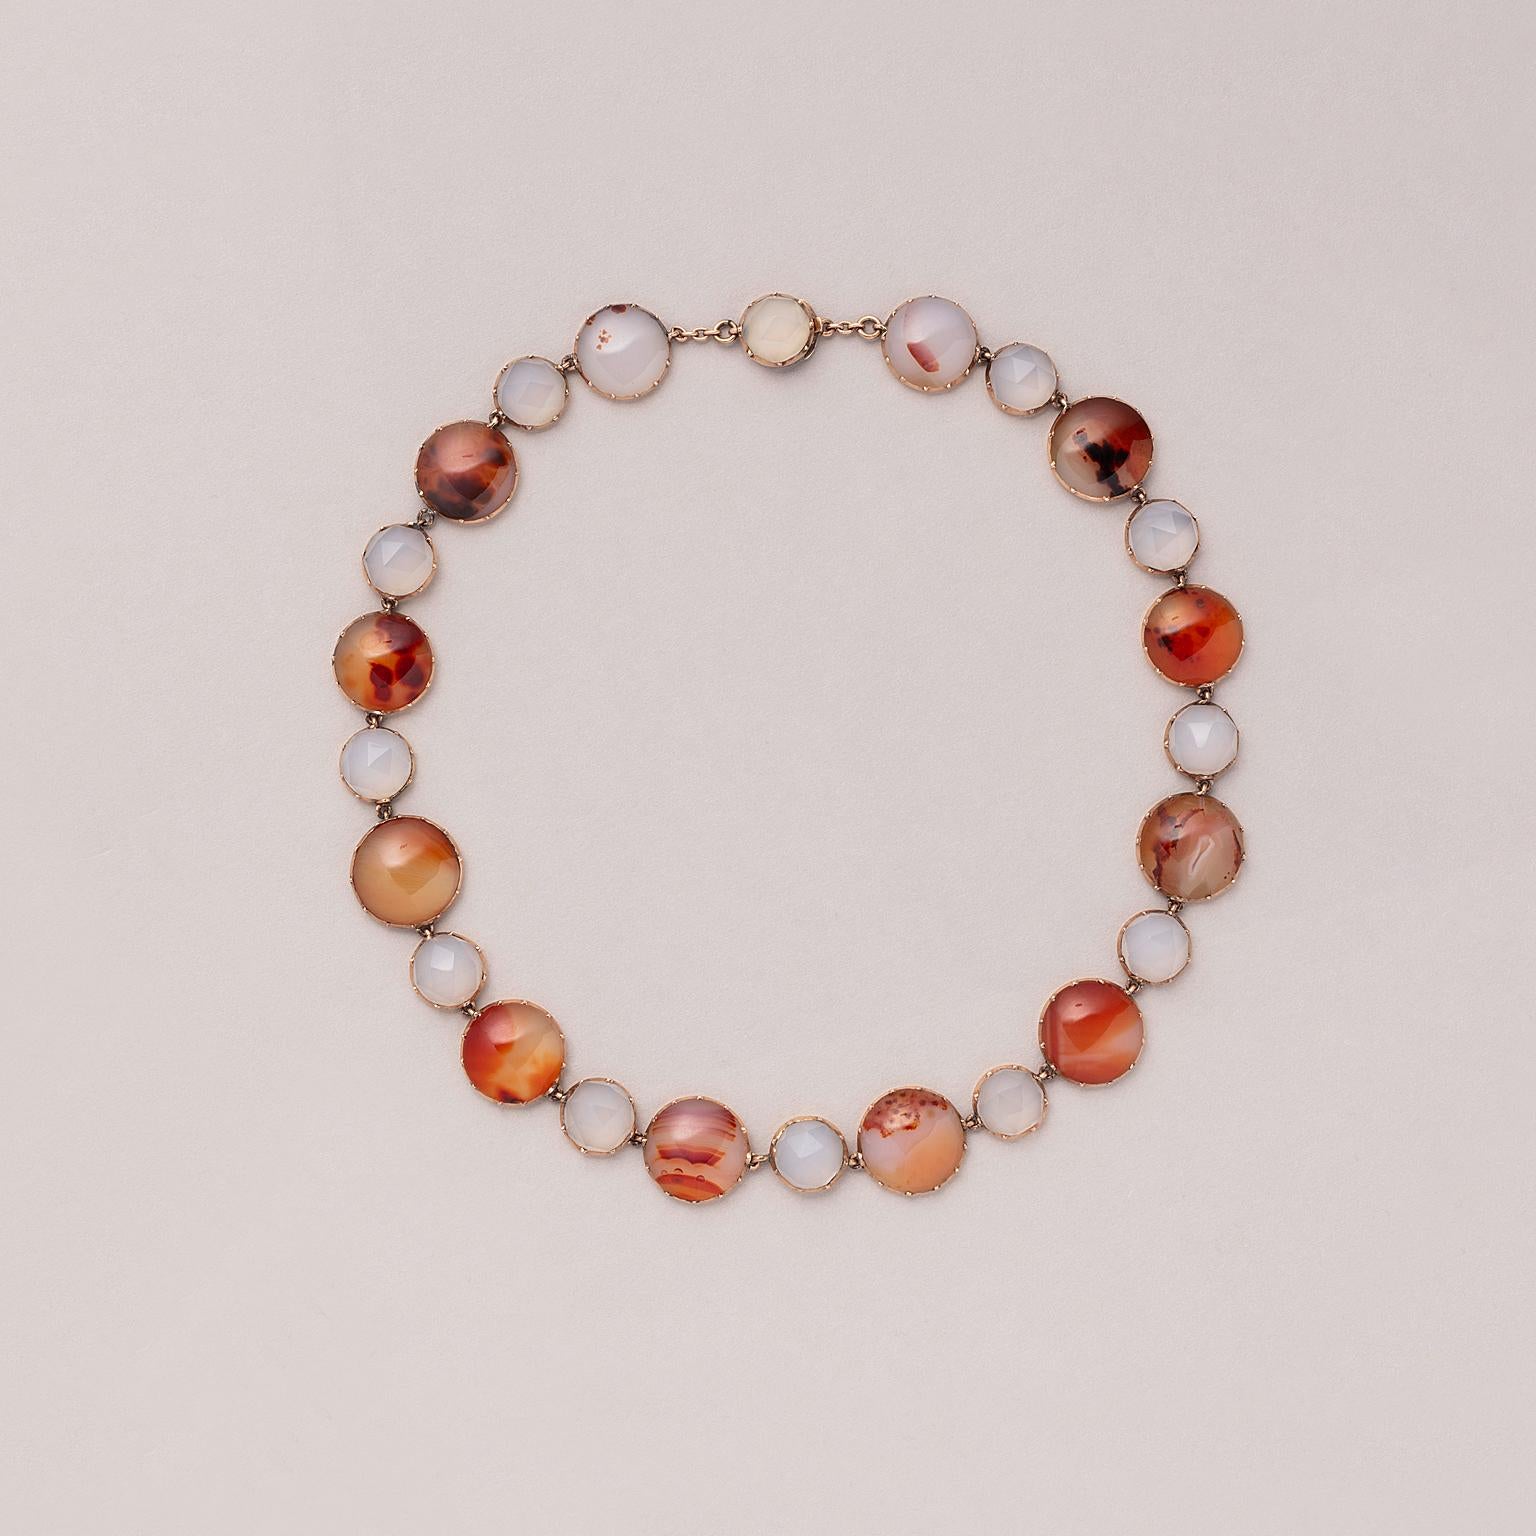 An 12 carat rosé gold necklace set with cabochon cut orange carnelian, and rose cut white-grey calcedony agate, end 18th century or early 19th century, England.

weight:  33.62 grams
length: 39 cm
width: 11 - 15 m